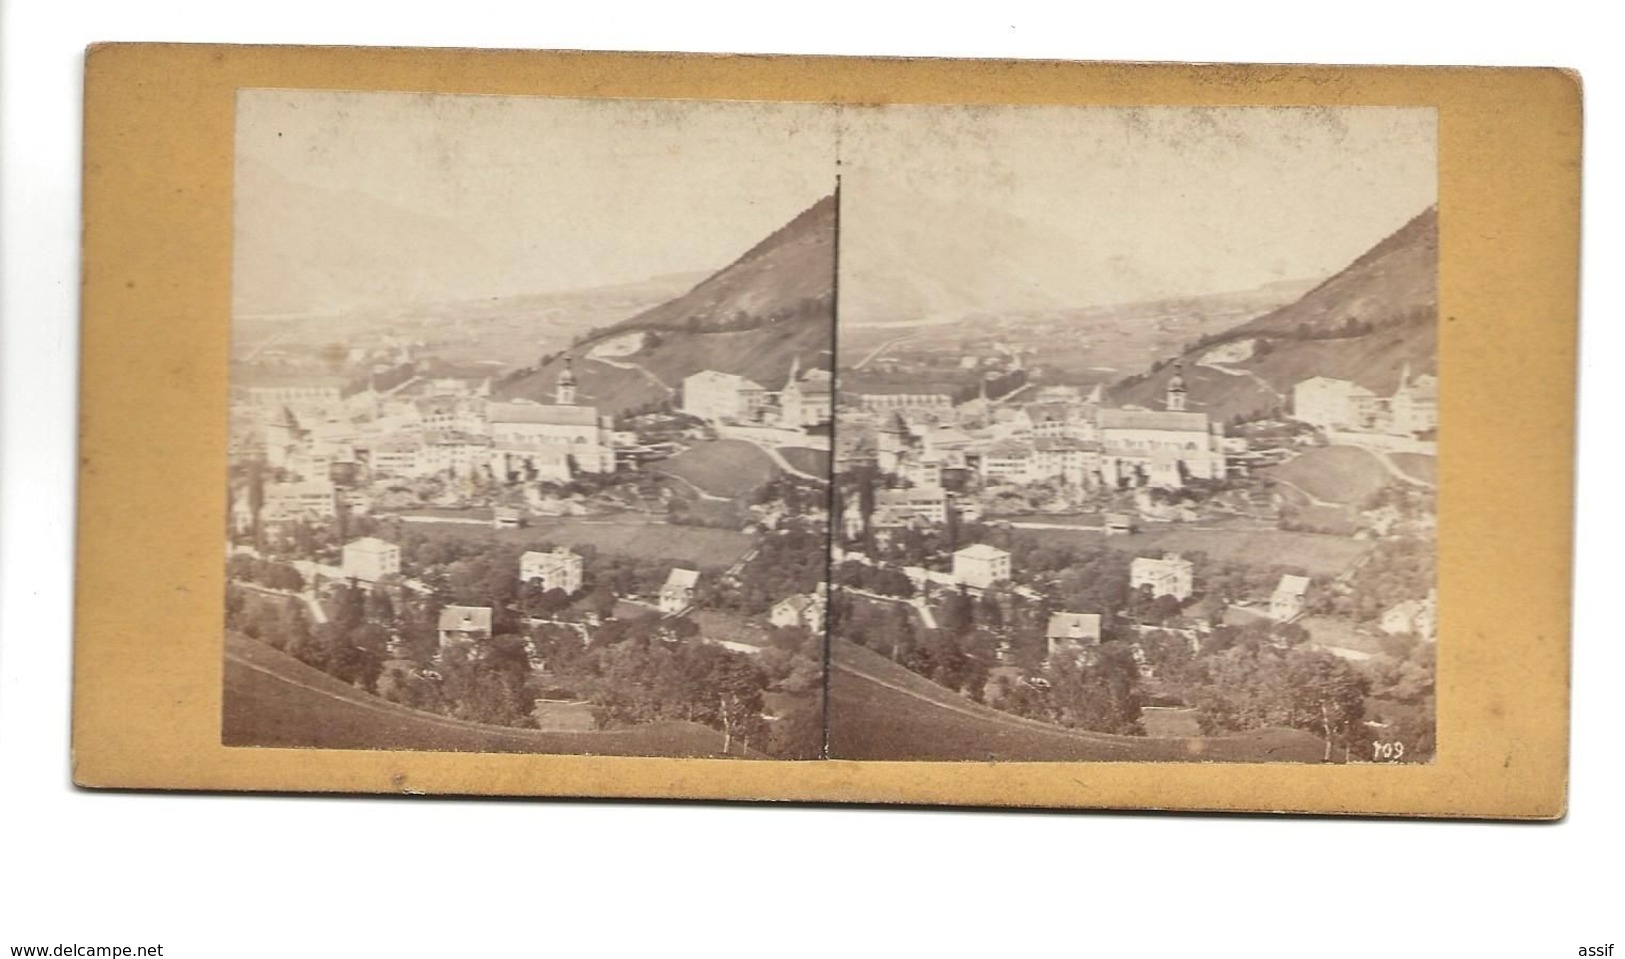 SUISSE COMMUNE DE  COIRE  PHOTO STEREO CIRCA 1860 /FREE SHIPPING R - Stereo-Photographie